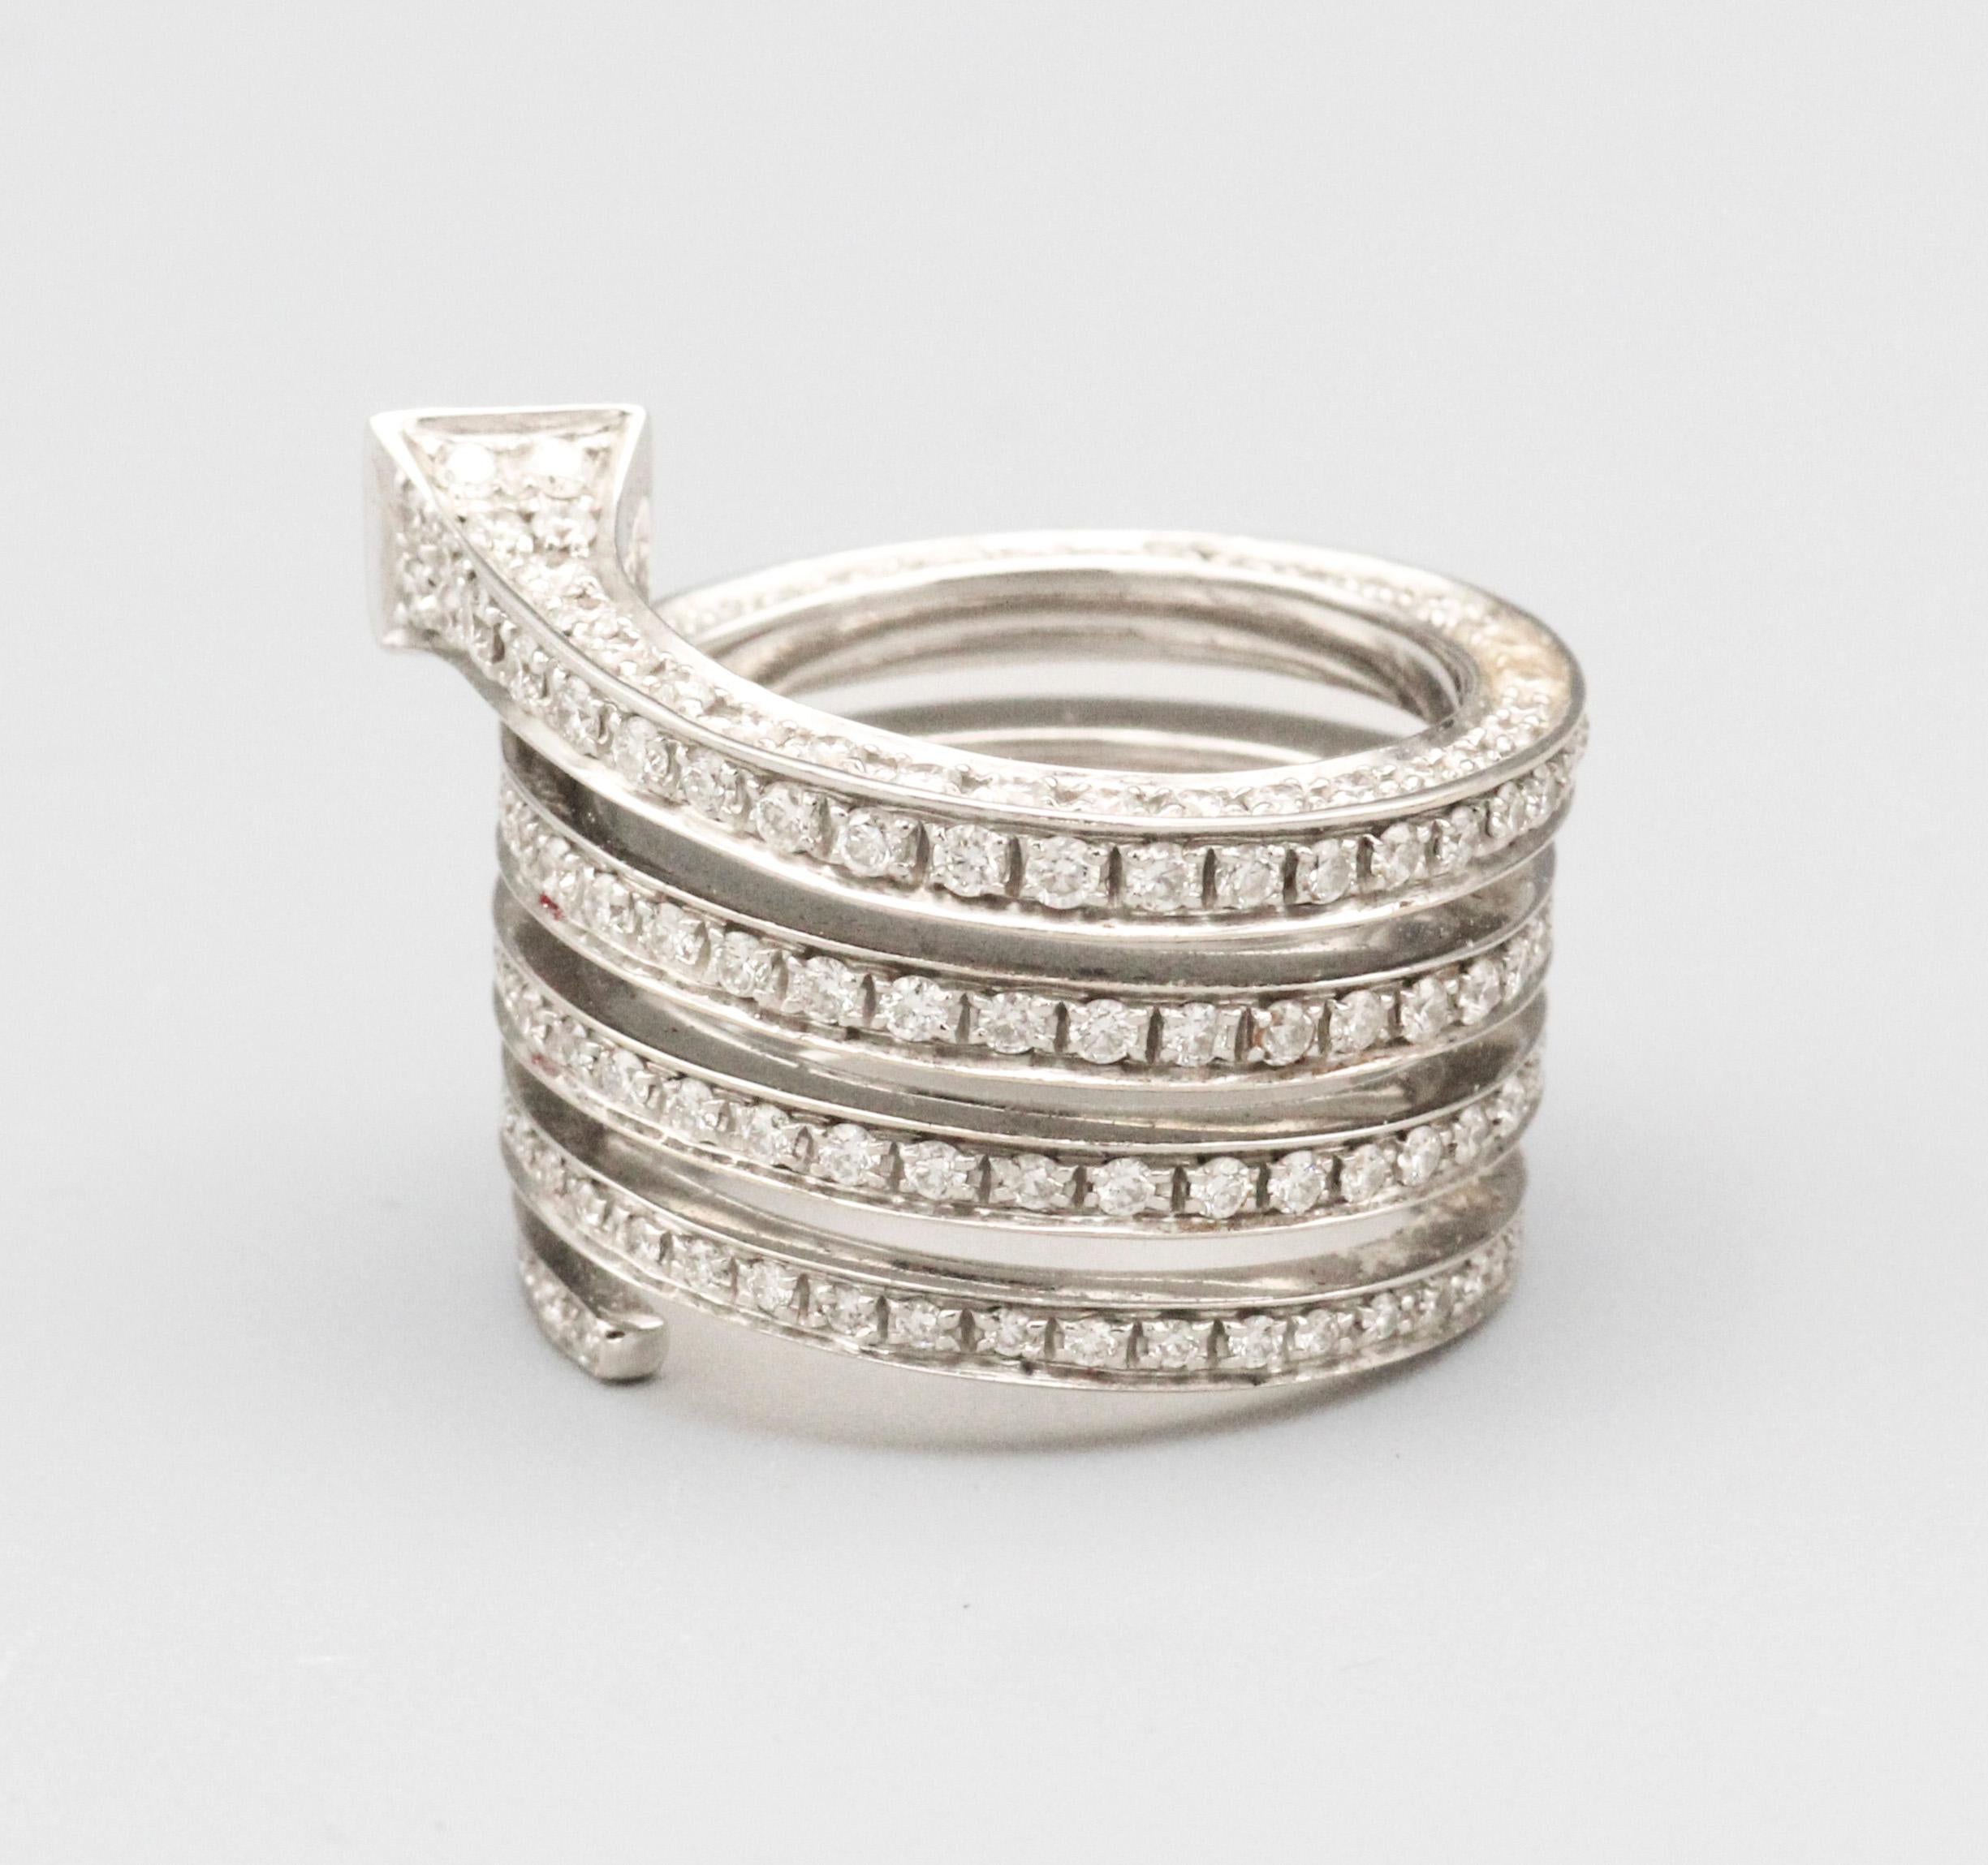 Gucci Chiodo Diamond and 18 Karat White Gold Wrap Around Nail Ring Size 6 In Good Condition For Sale In New York, NY